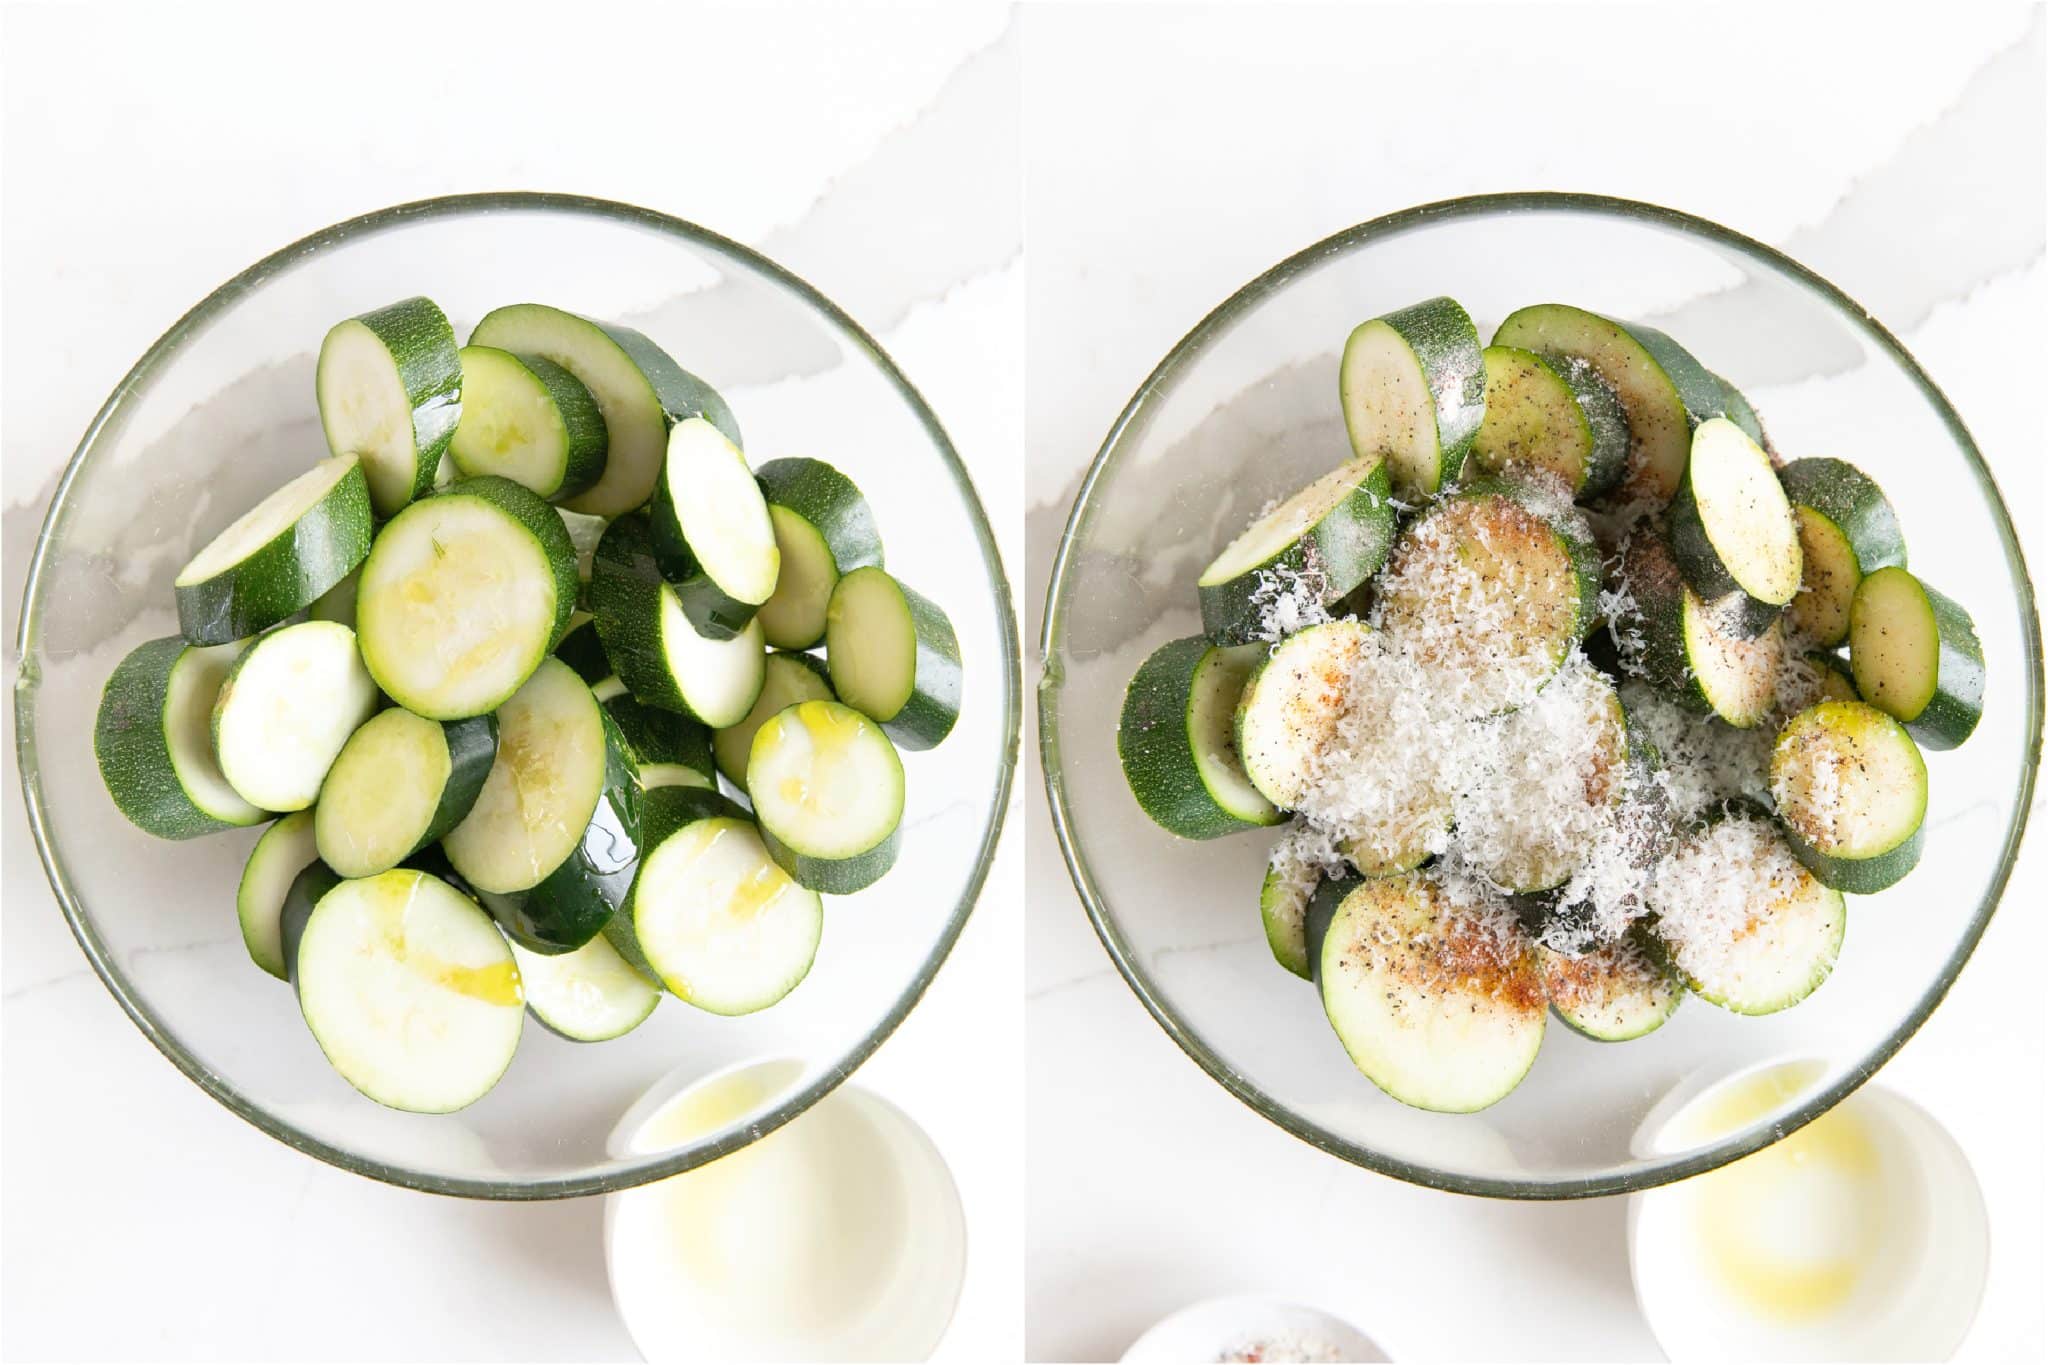 Bowl filled with sliced zucchini drizzled with olive oil and second image of a bowl filled with sliced zucchini drizzled with olive oil, seasoning, and grated parmesan cheese.